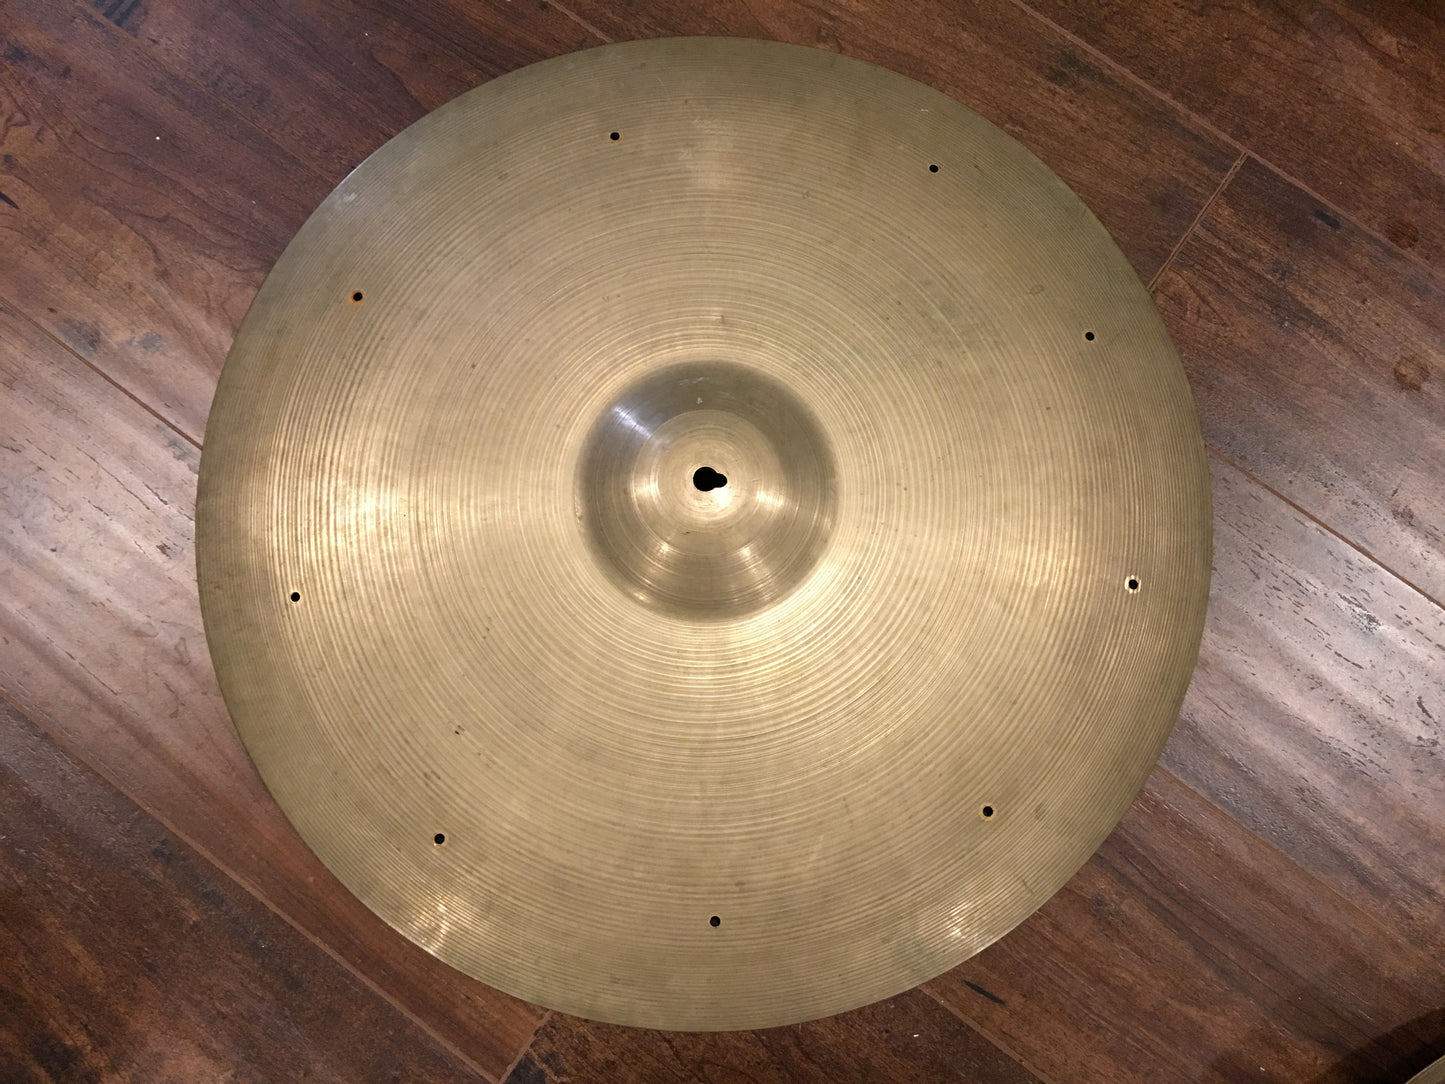 22" Zildjian A 1950's Large Hollow Block Stamp Ride Cymbal 2434g Inventory  # 323